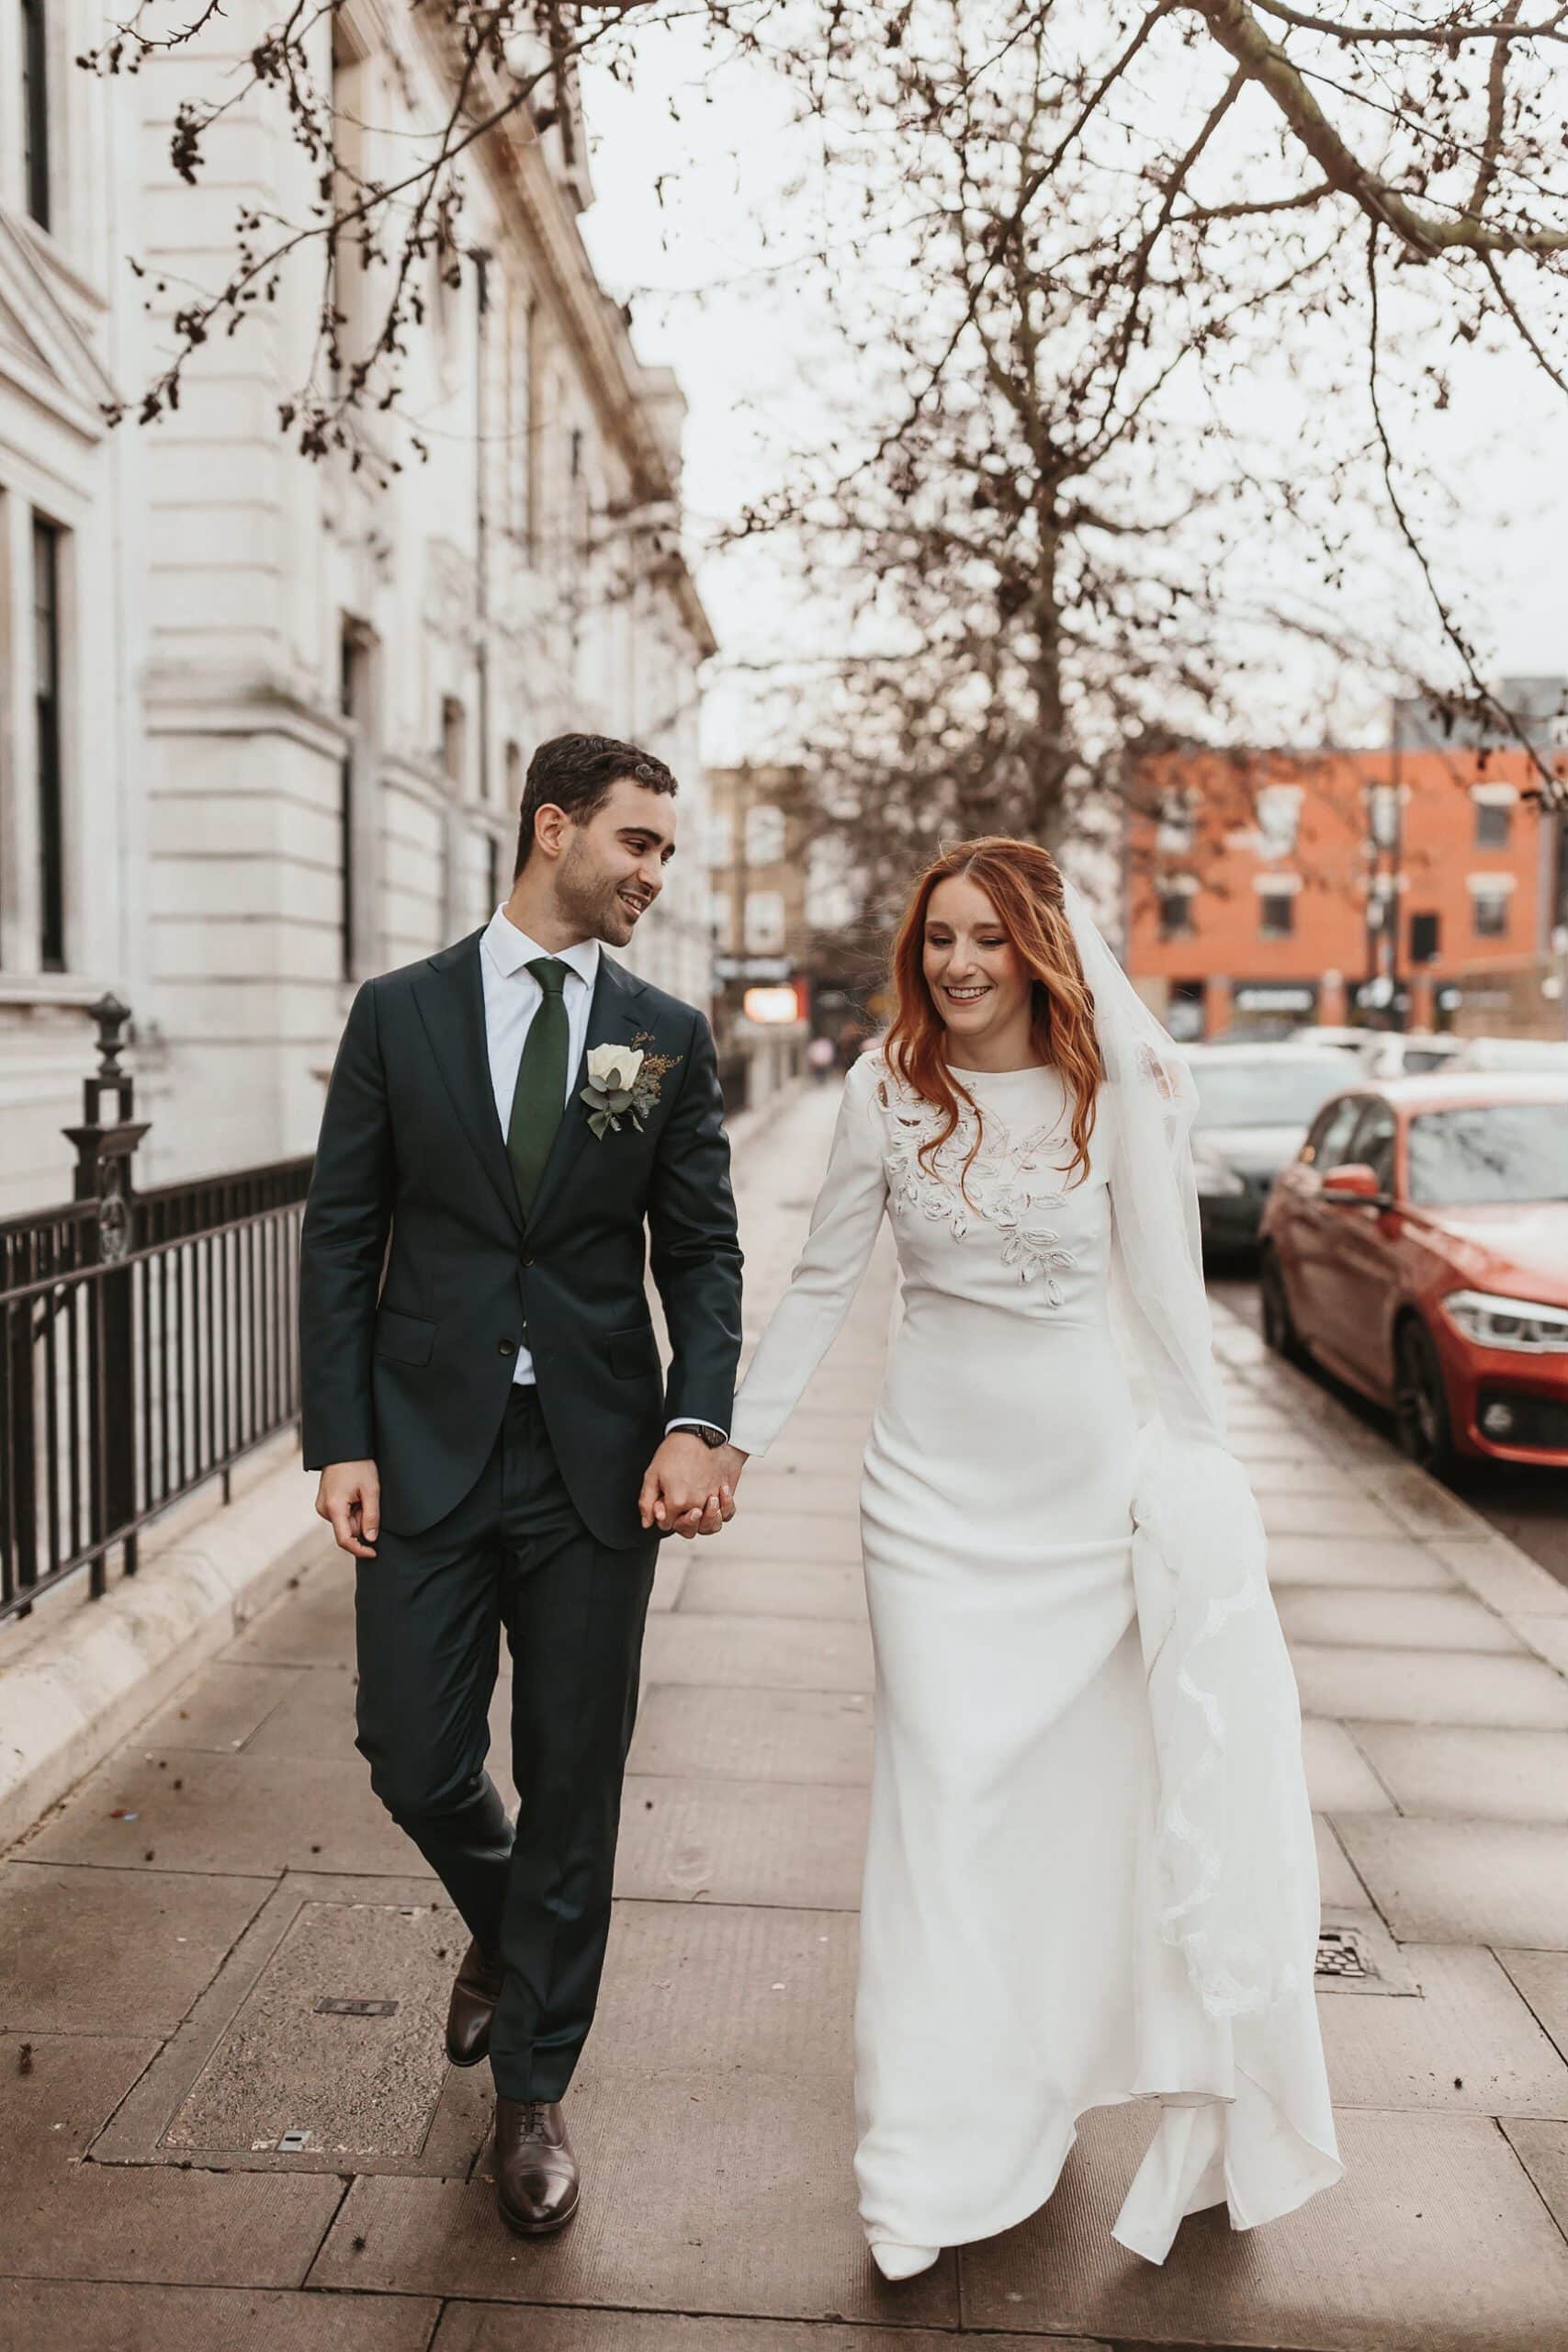 Portrait of a bride and groom walking down the streets of London